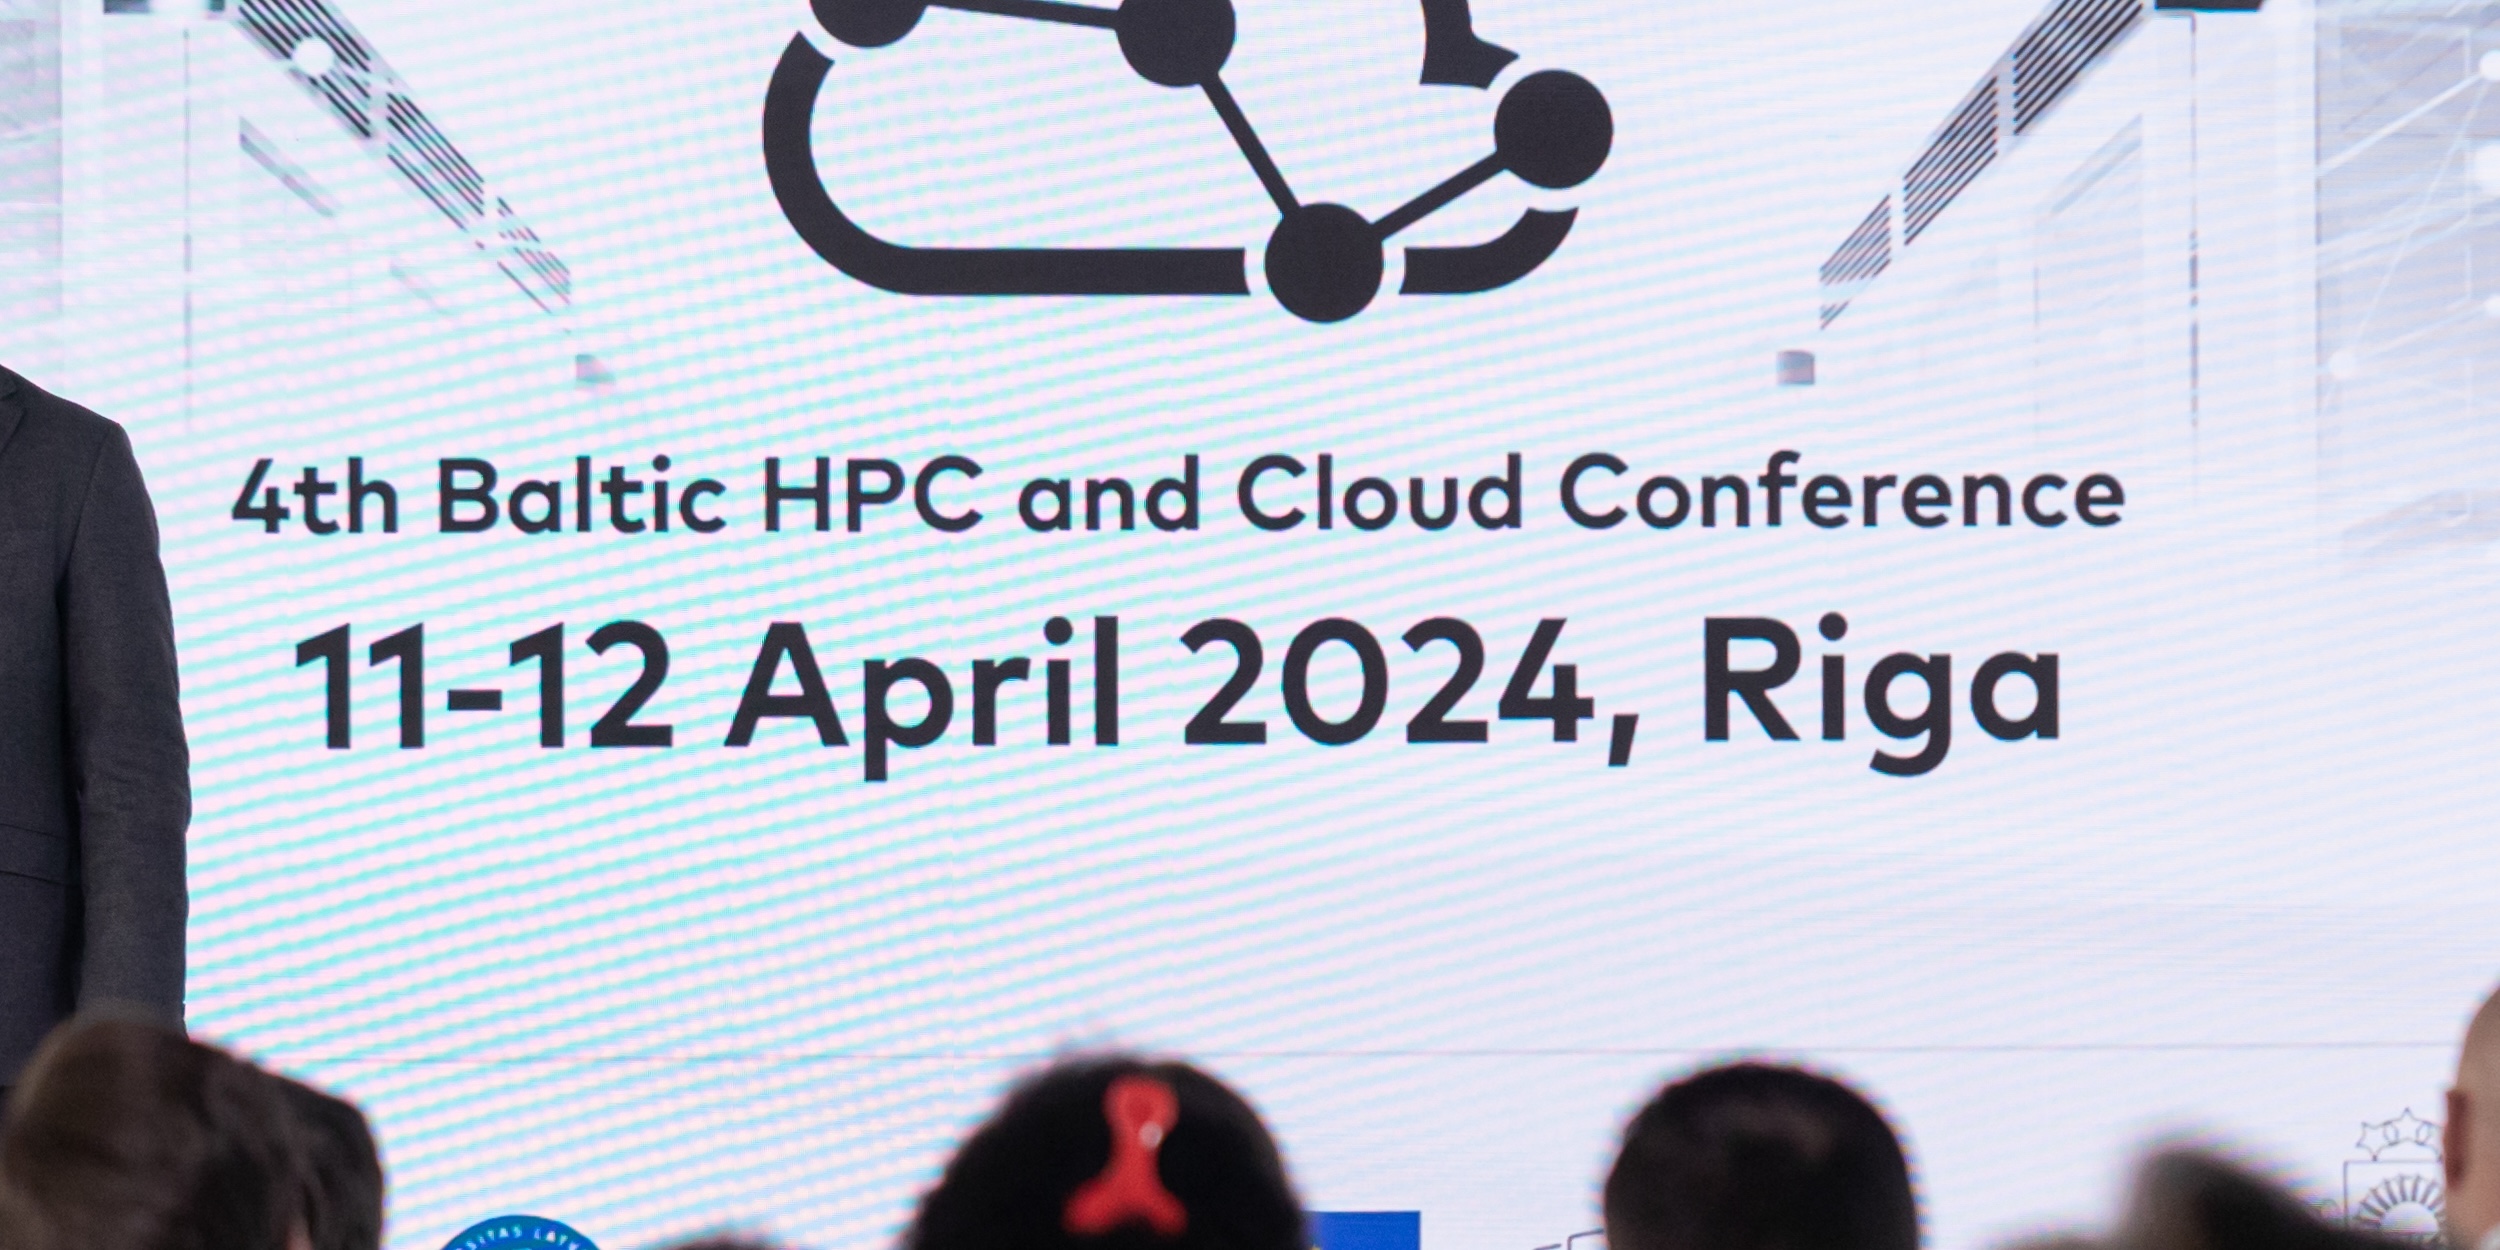 A screen showing the title of the conference. 4th Baltic HPC and Cloud Conference